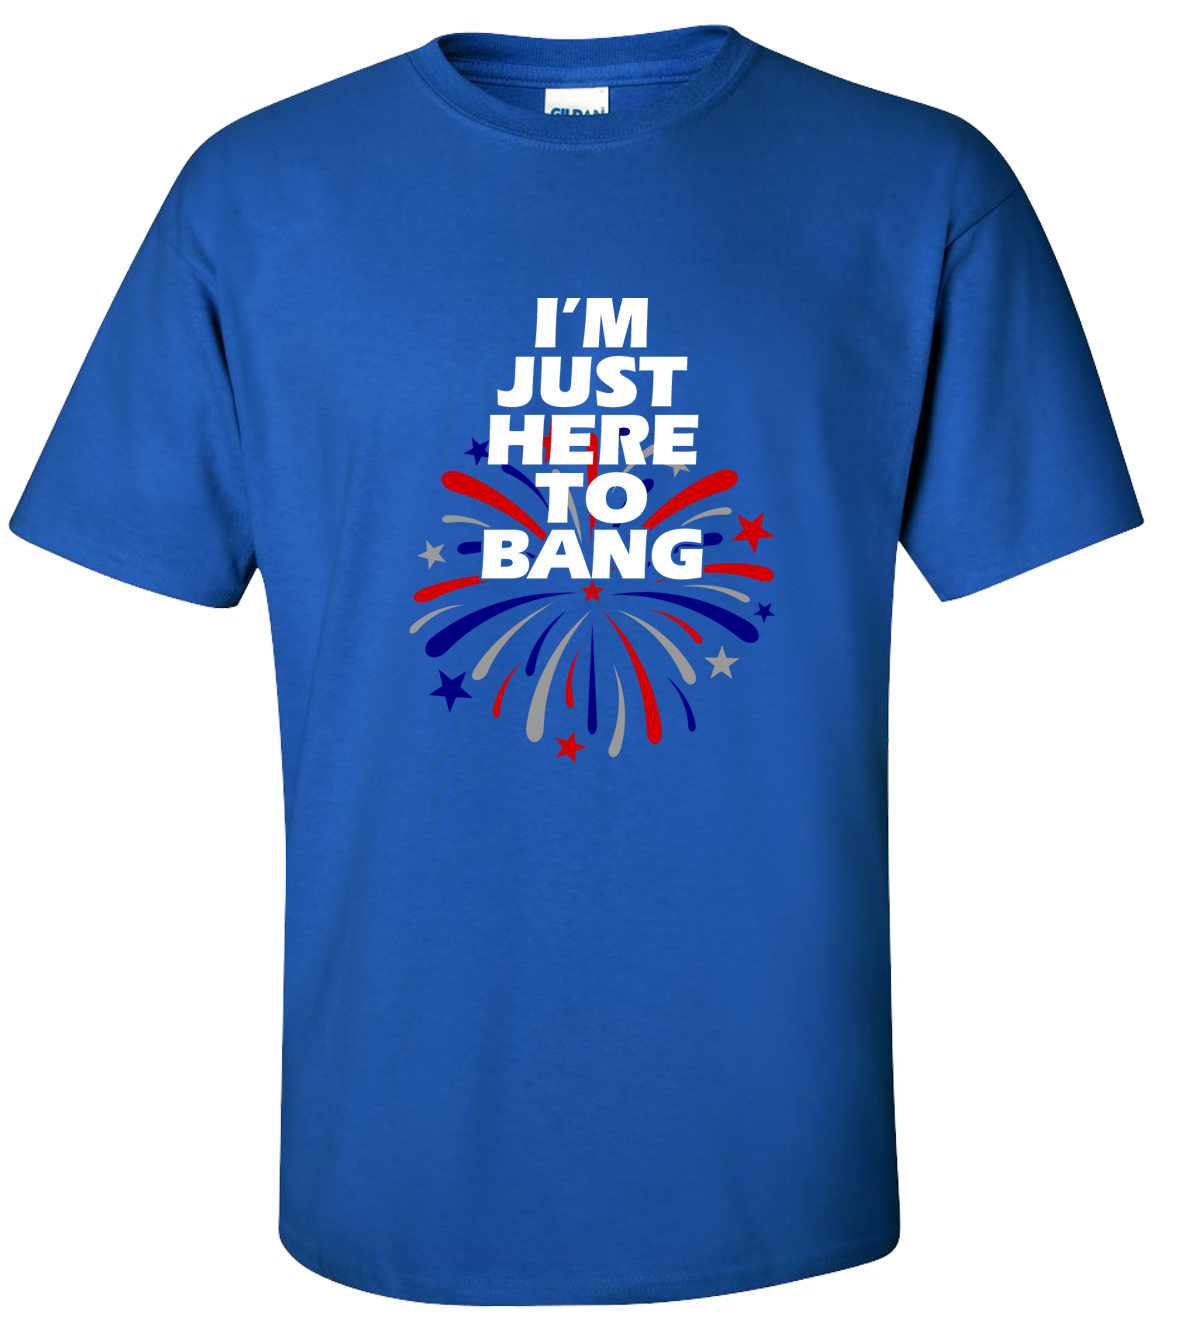 Funny I'm Just Here to Bang Fourth of July Unisex Short Sleeve T-Shirt-Royal-large - image 1 of 4